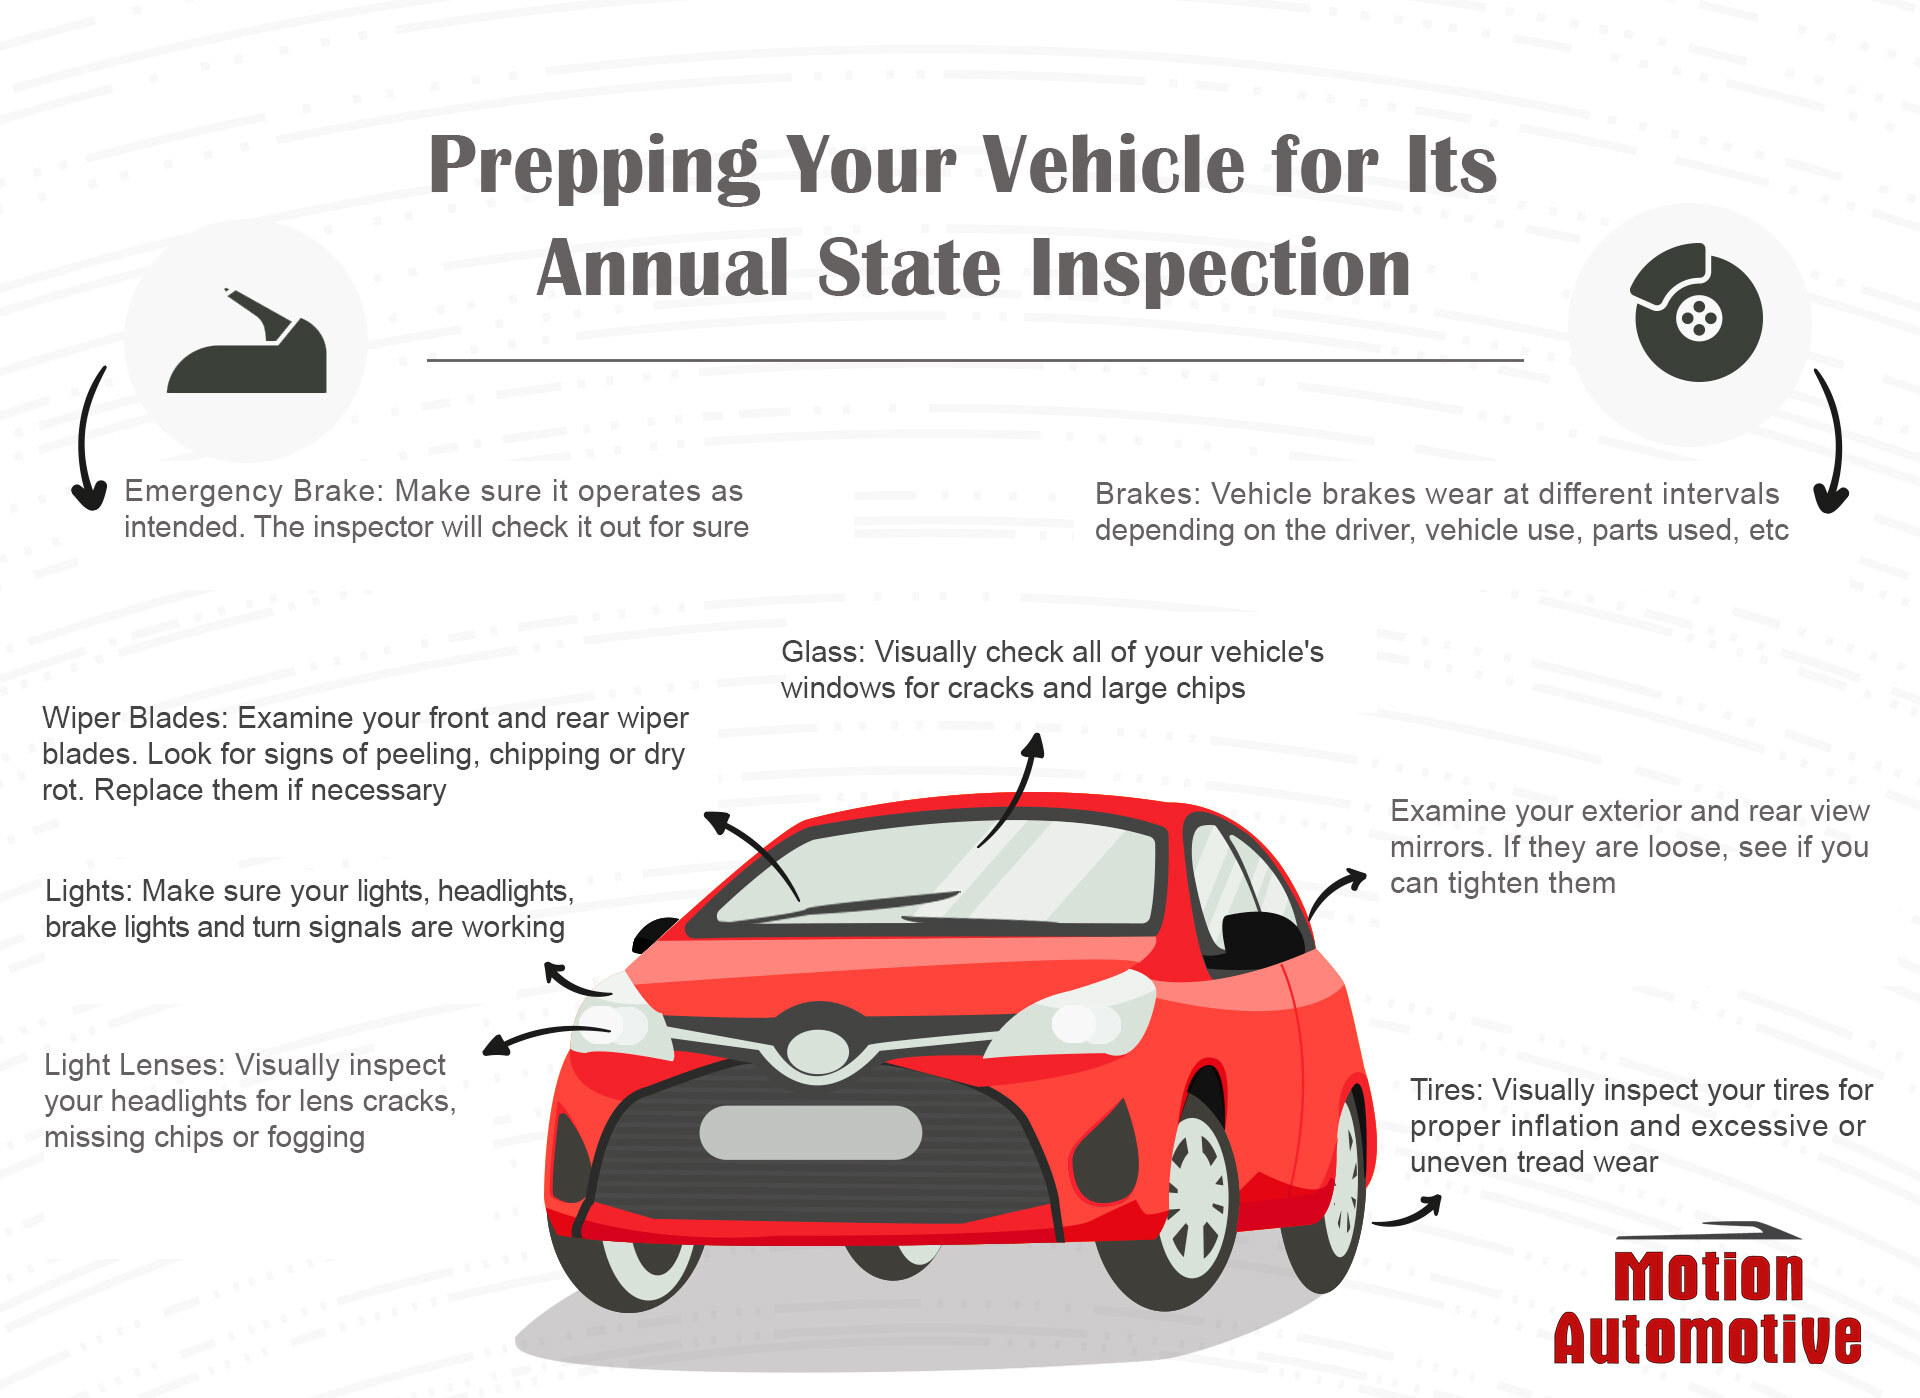 Prepping Your Vehicle for Its Annual State Inspection